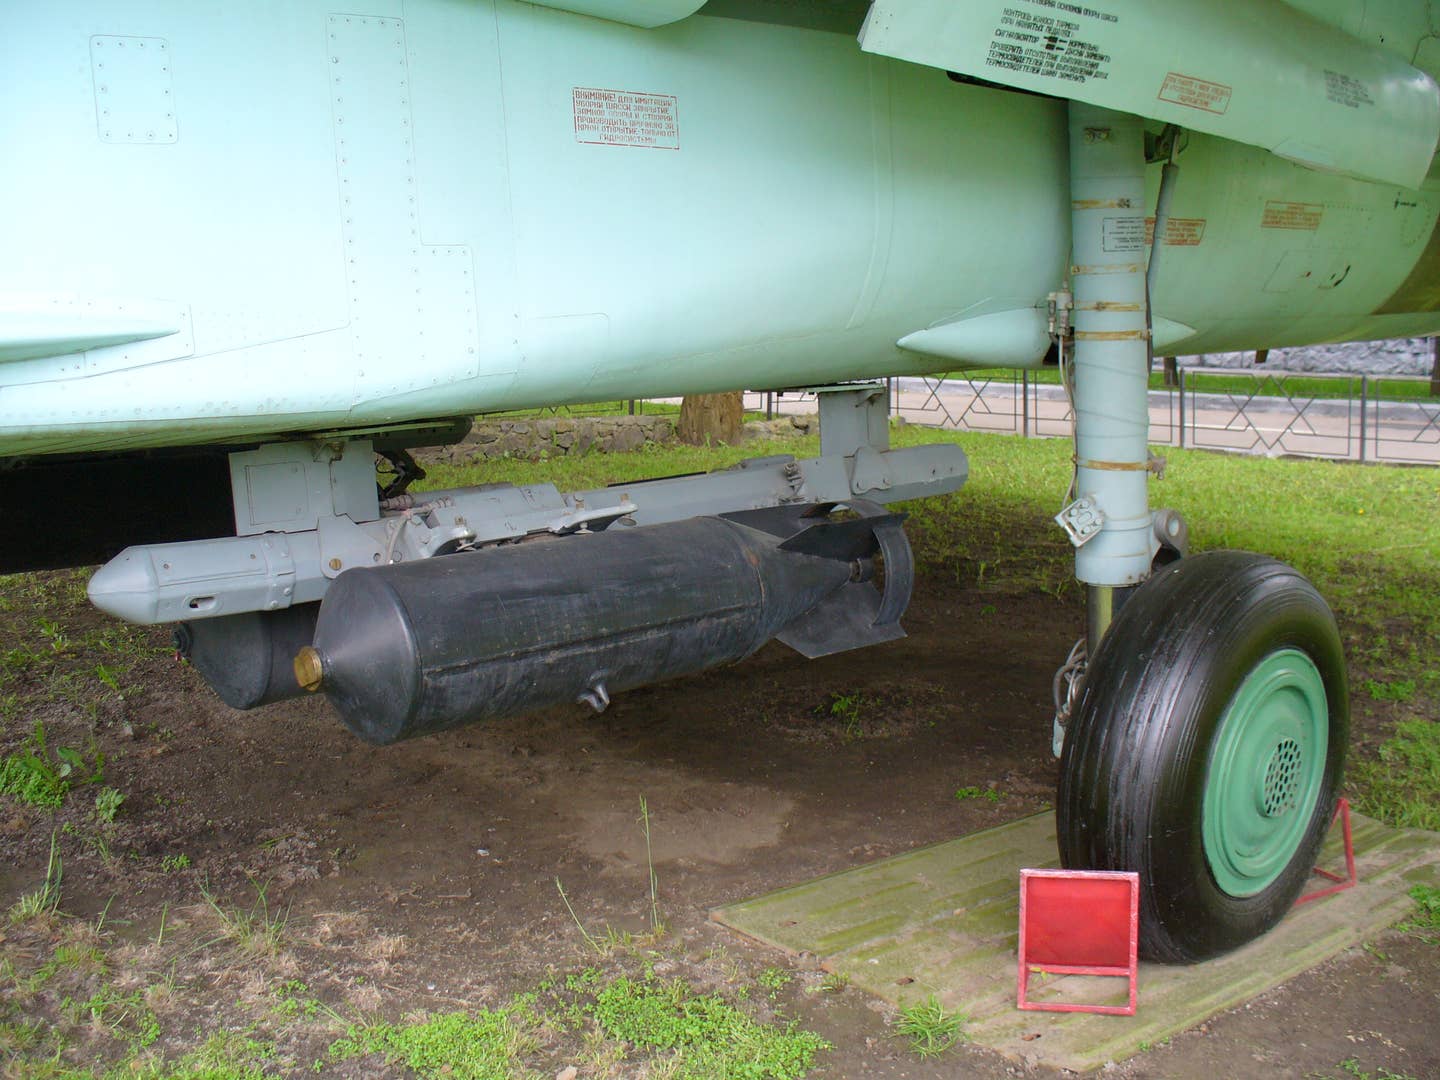 A rare image of a Su-27 fitted with freefall bombs. This example is preserved in the Ukrainian Air Force Museum in Vinnytsia. <em>George Chernilevsky/Wikimedia Commons</em>